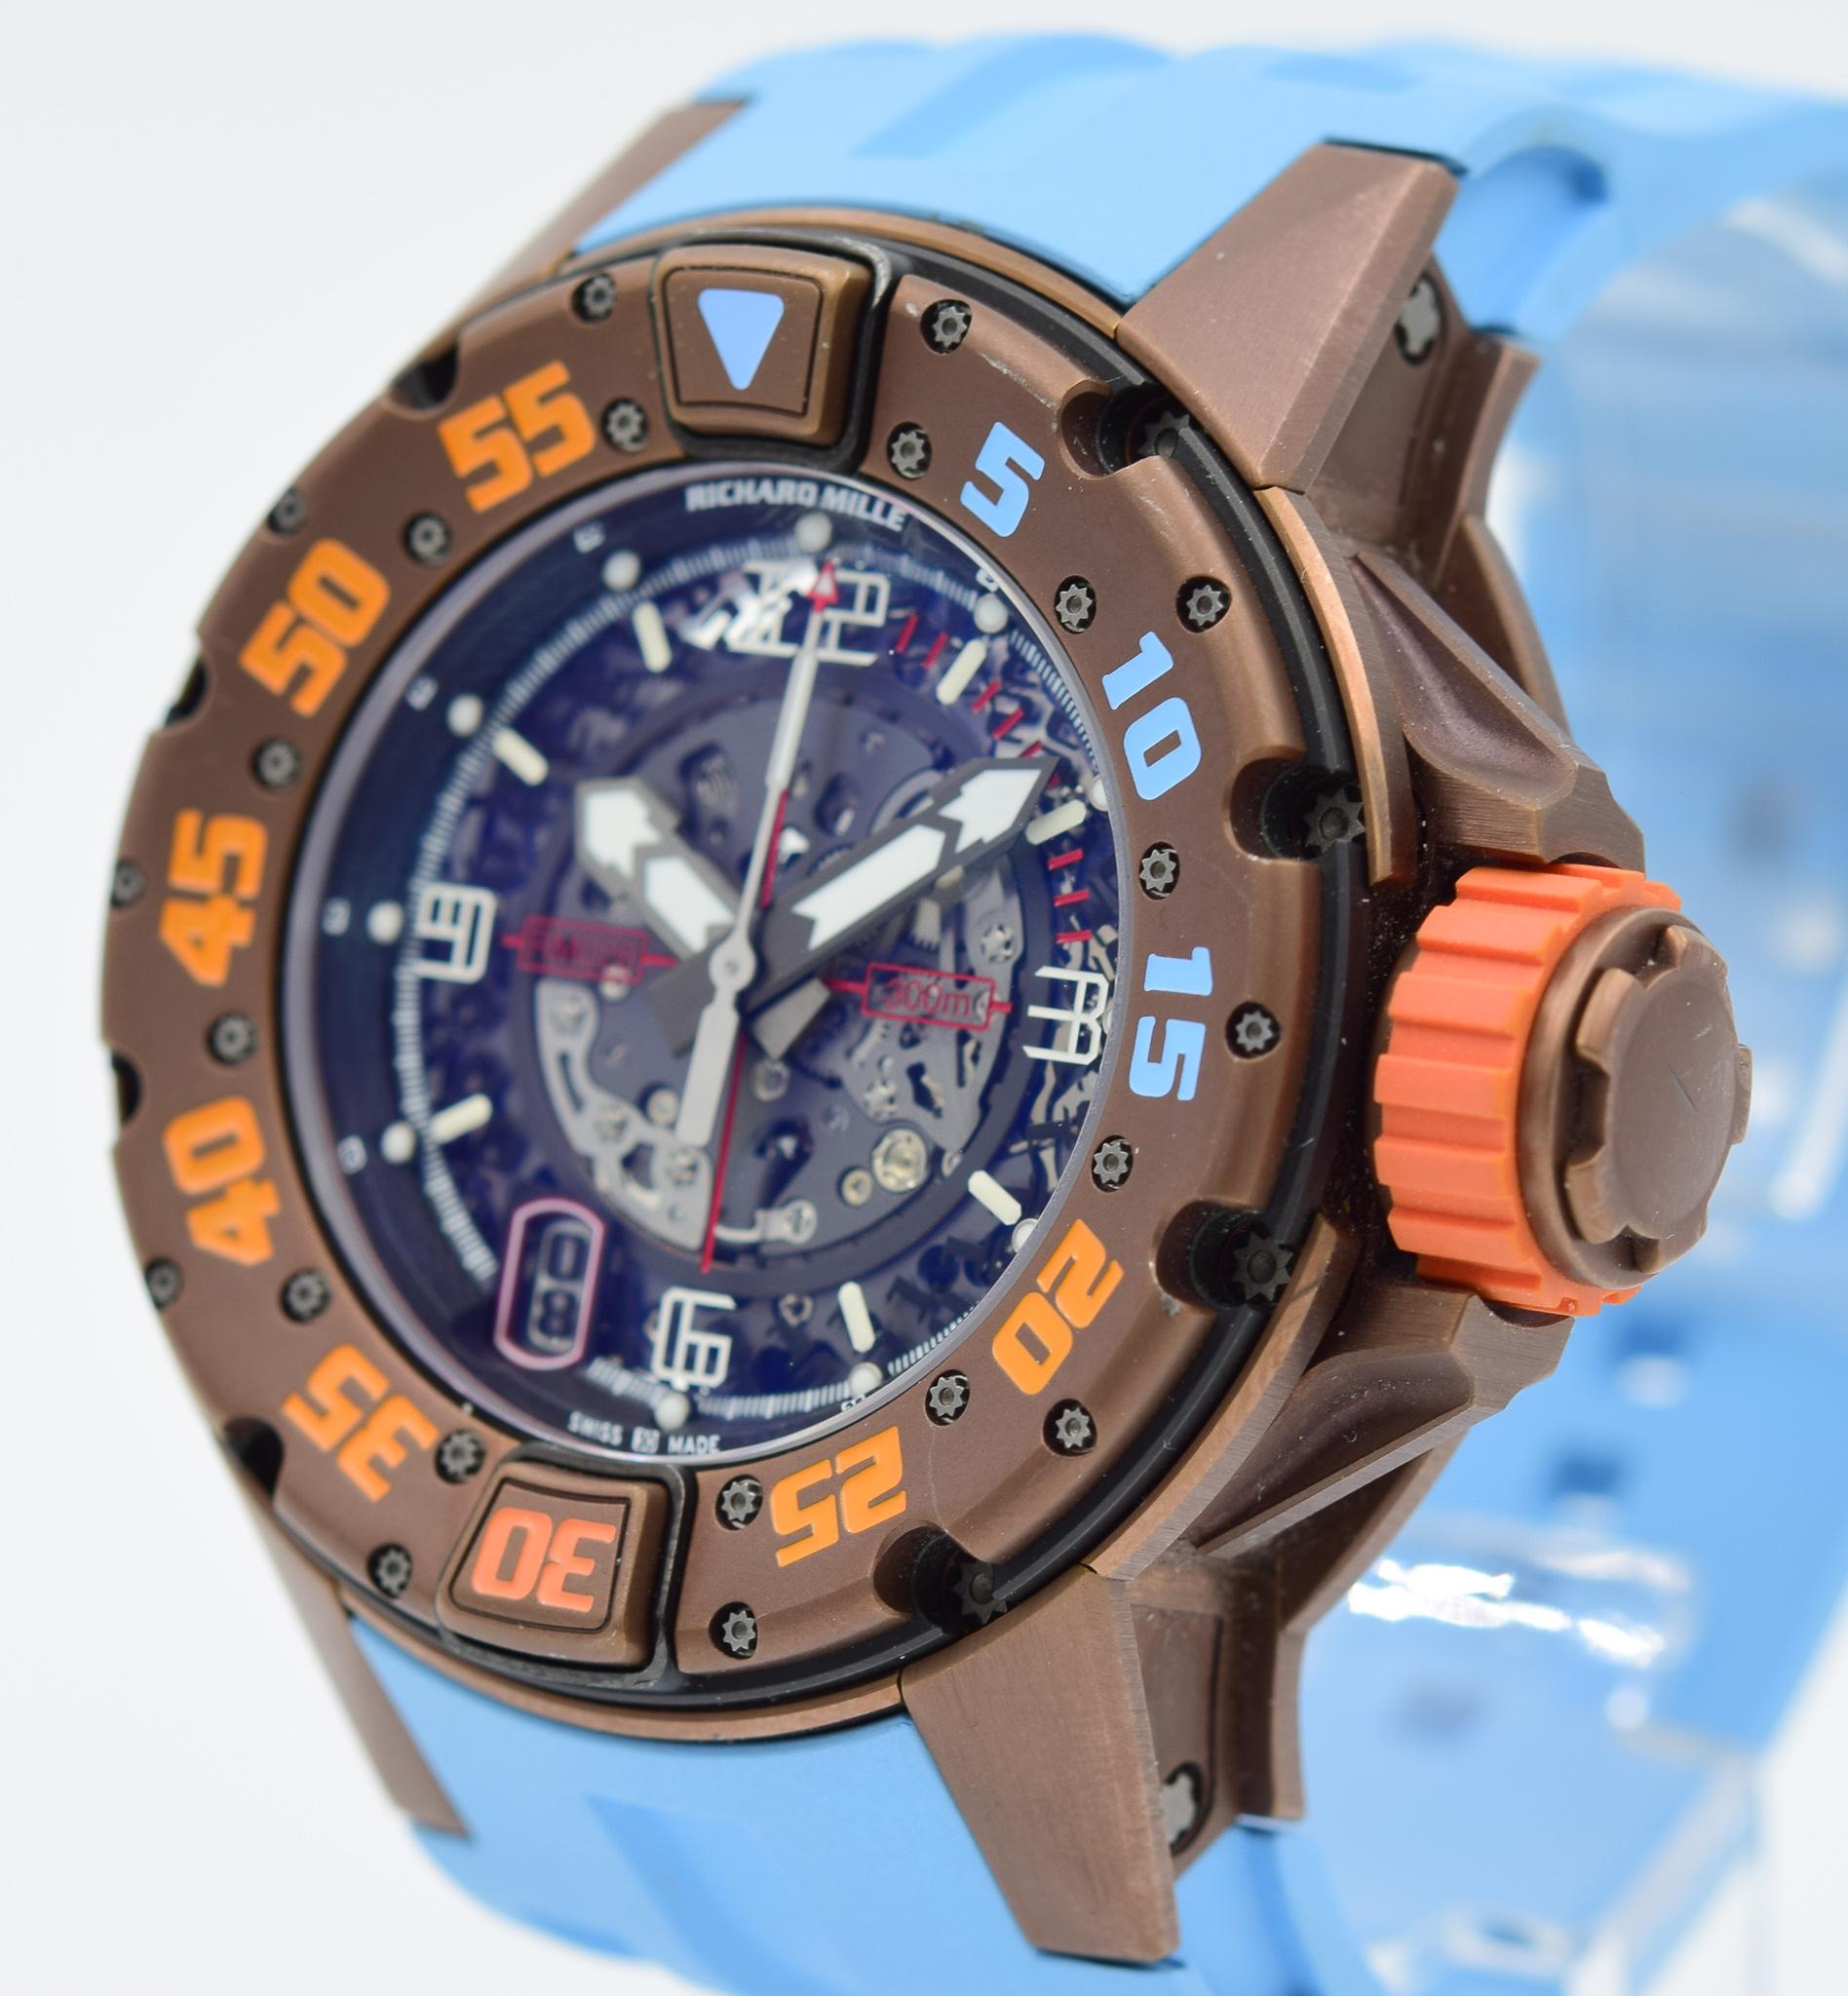 This Richard Mille has recently come to the store on trade and is in excellent condition!  This will come with a total of four strap options: Brown, Blue, Orange and White.  The watch boasts an incredible double-barrel in-house movement with a 55